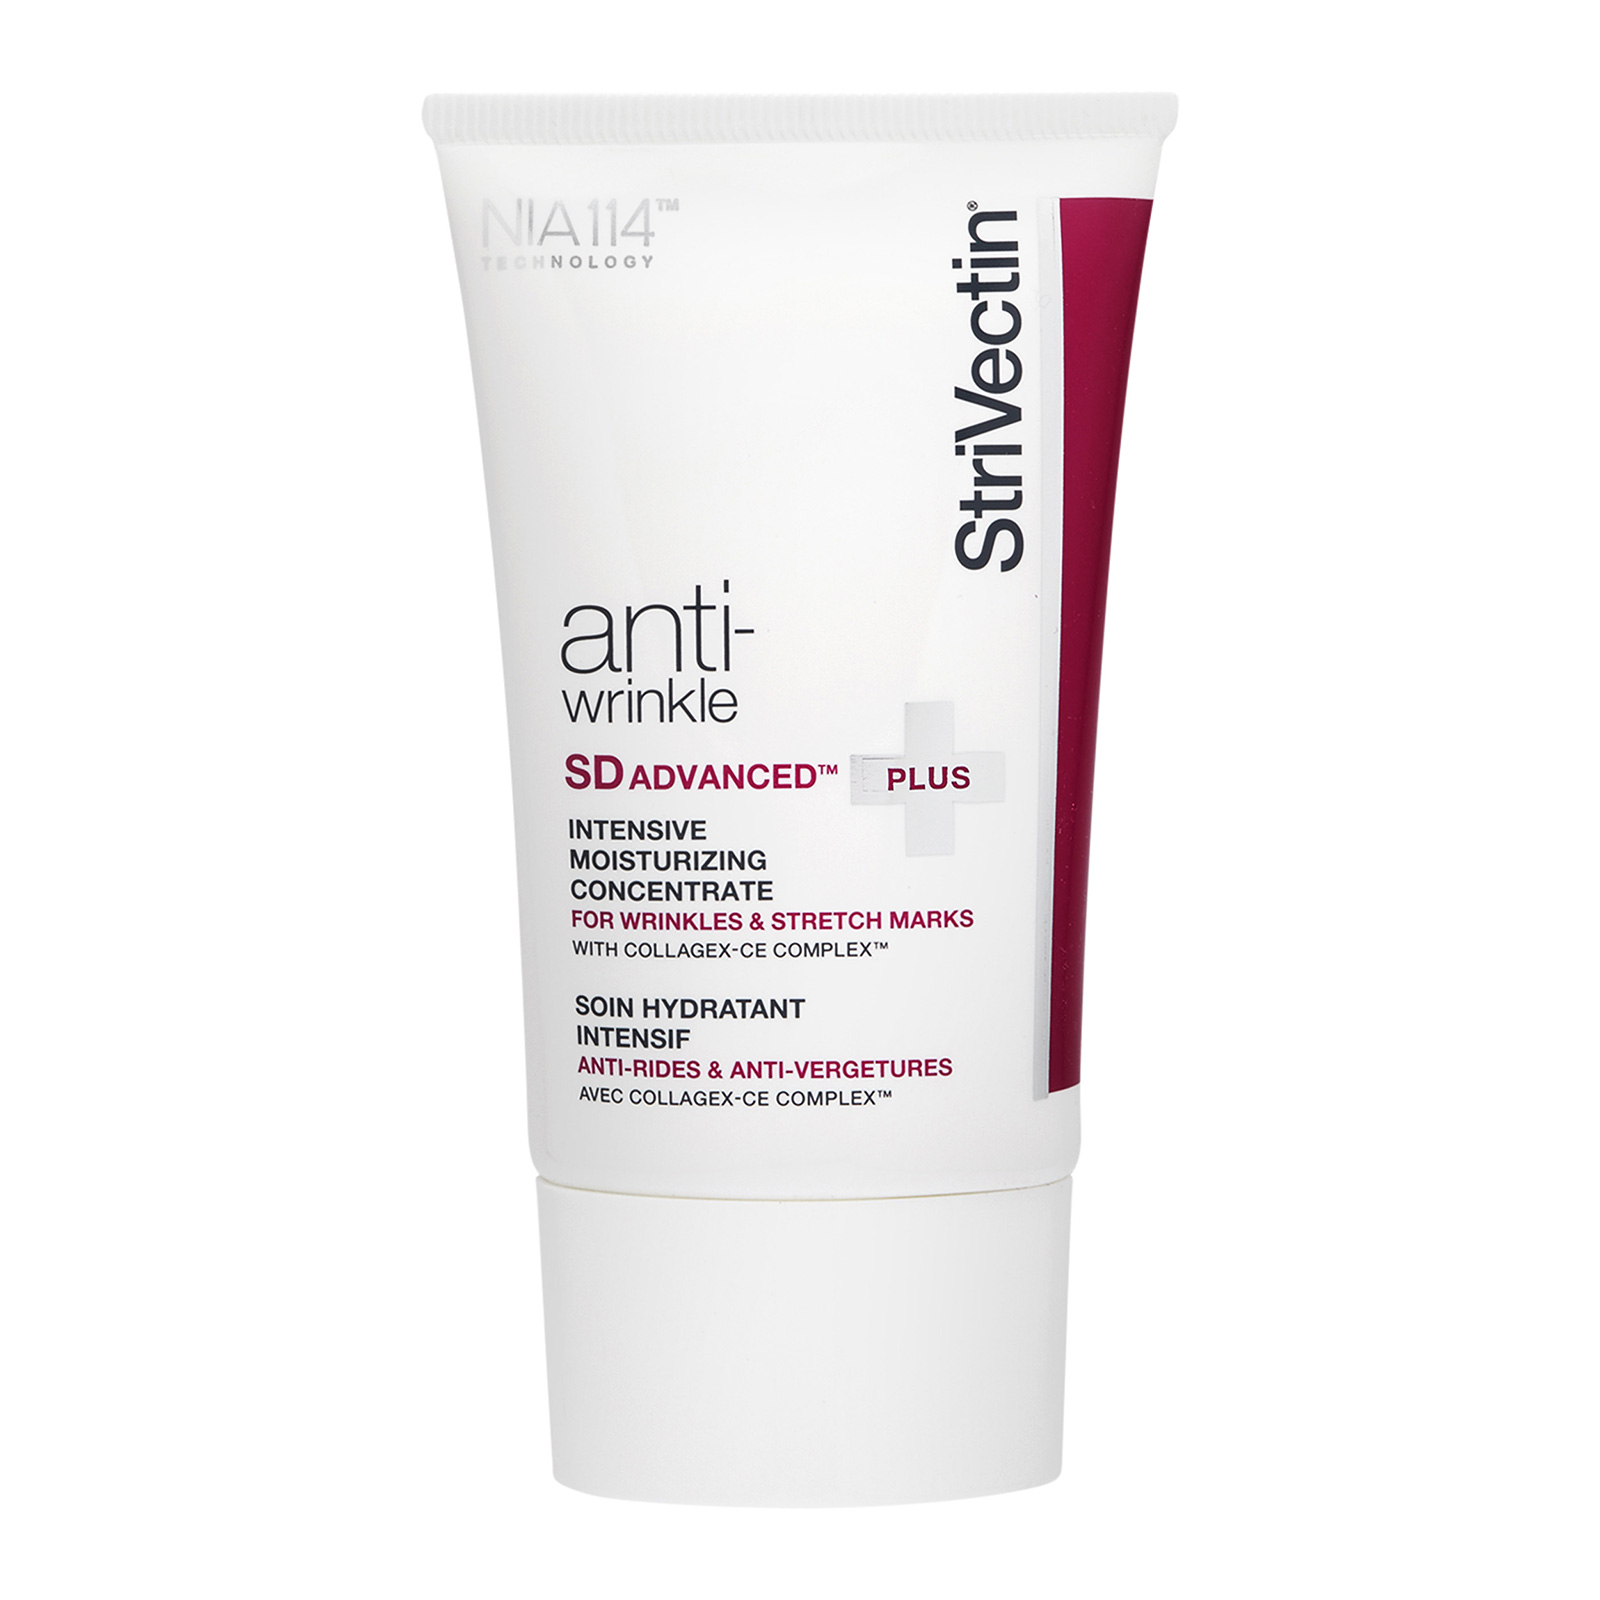 Anti-Wrinkle SD Advanced Intensive Concentrate for Wrinkles & Stretch Marks